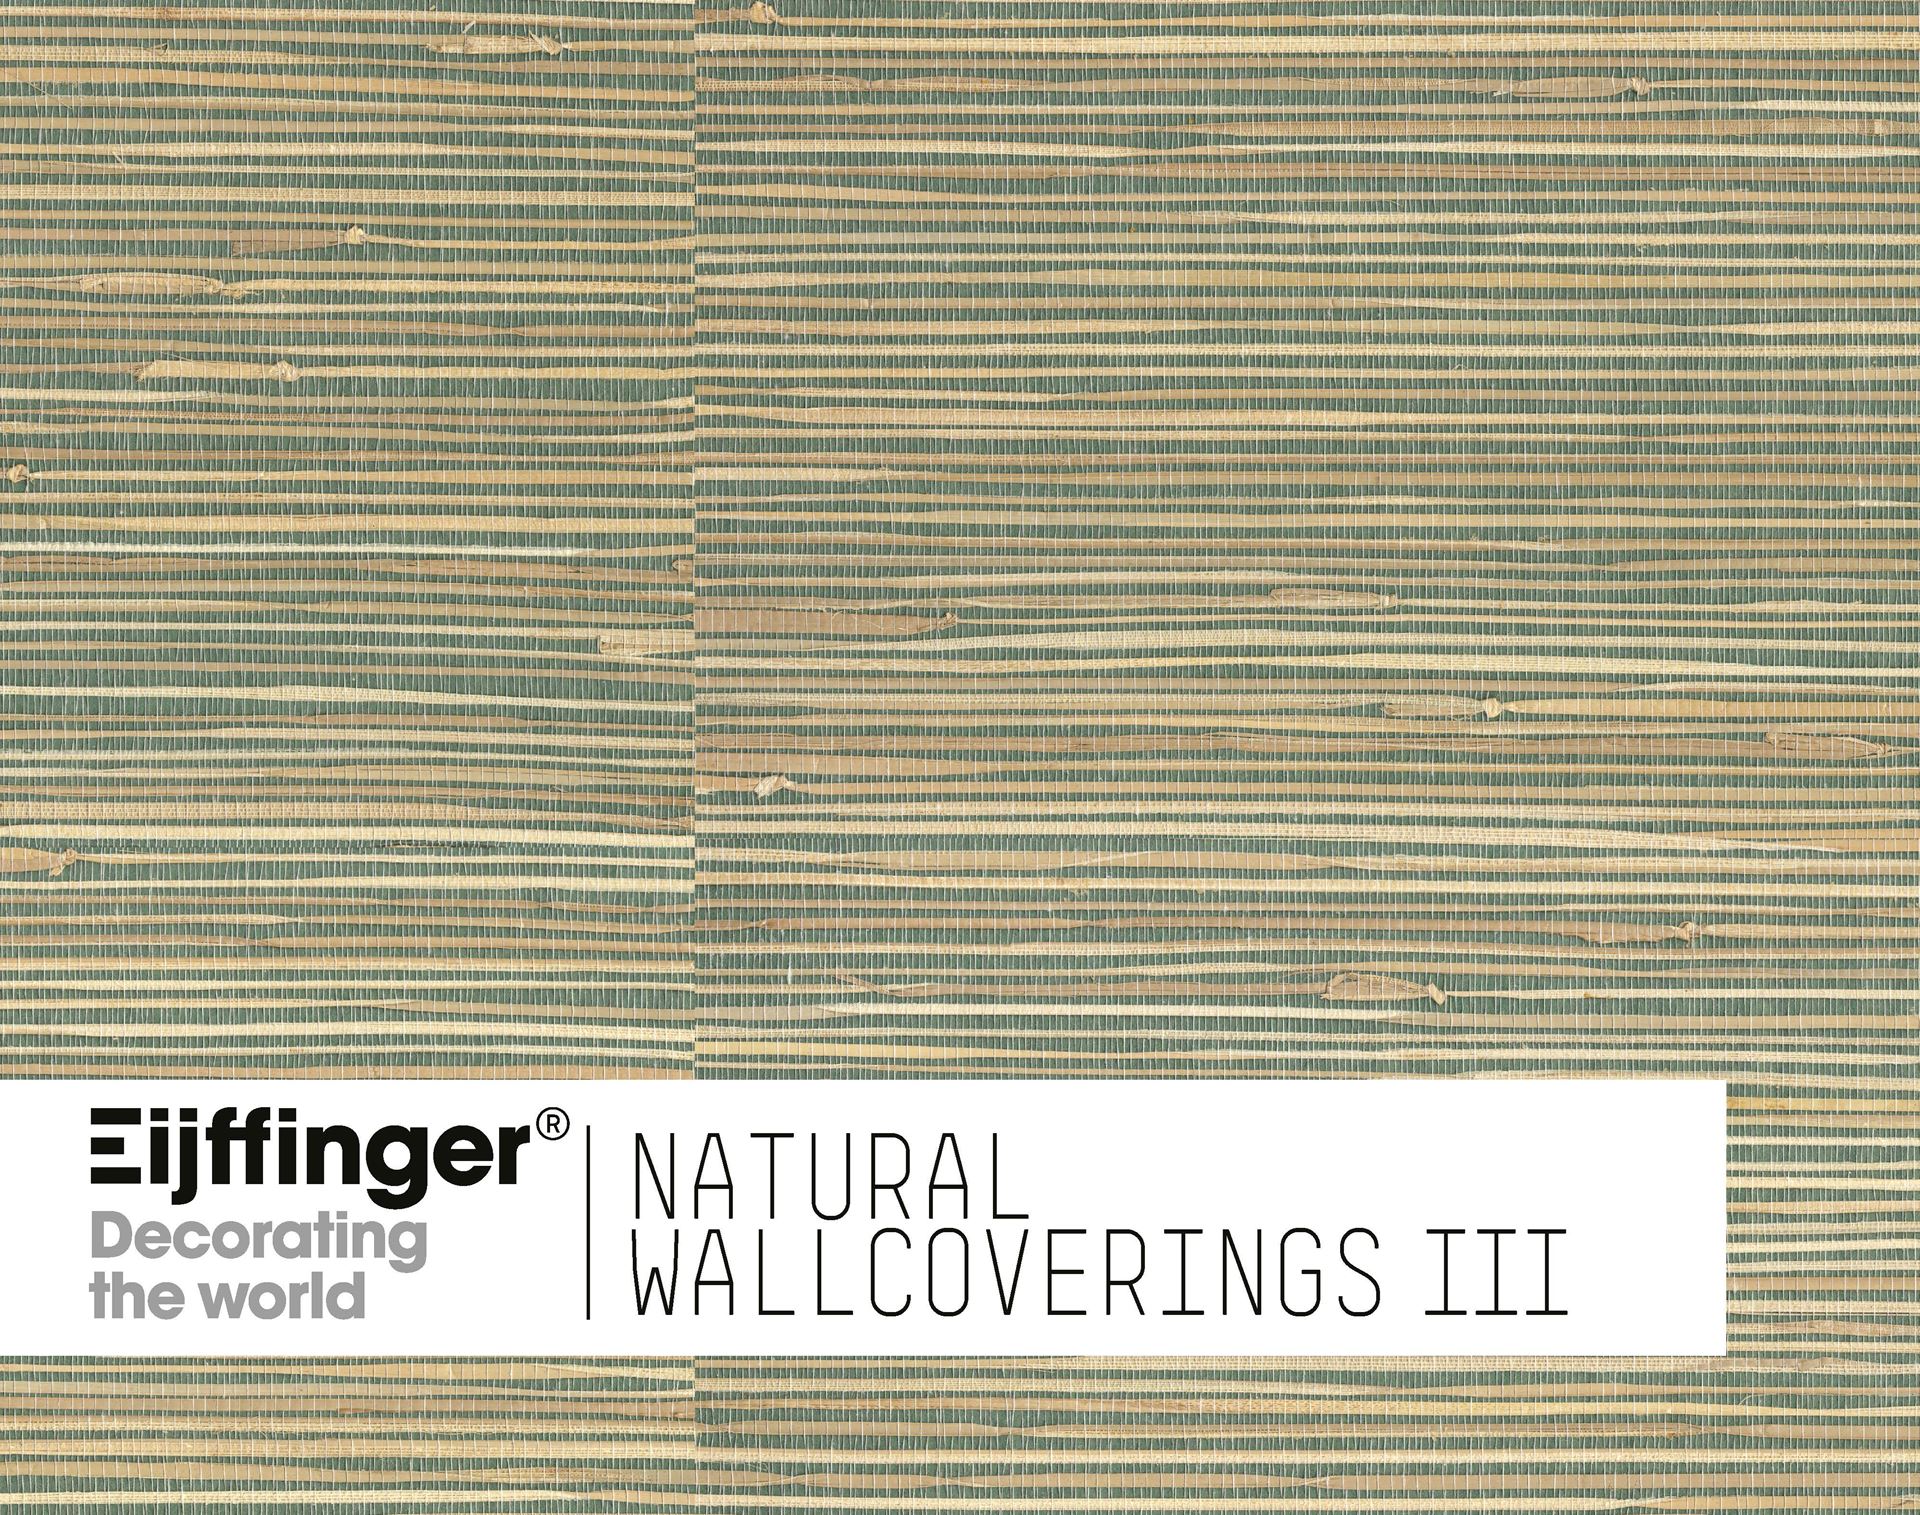 Thema's - Natural Wallcoverings III - Eijffinger